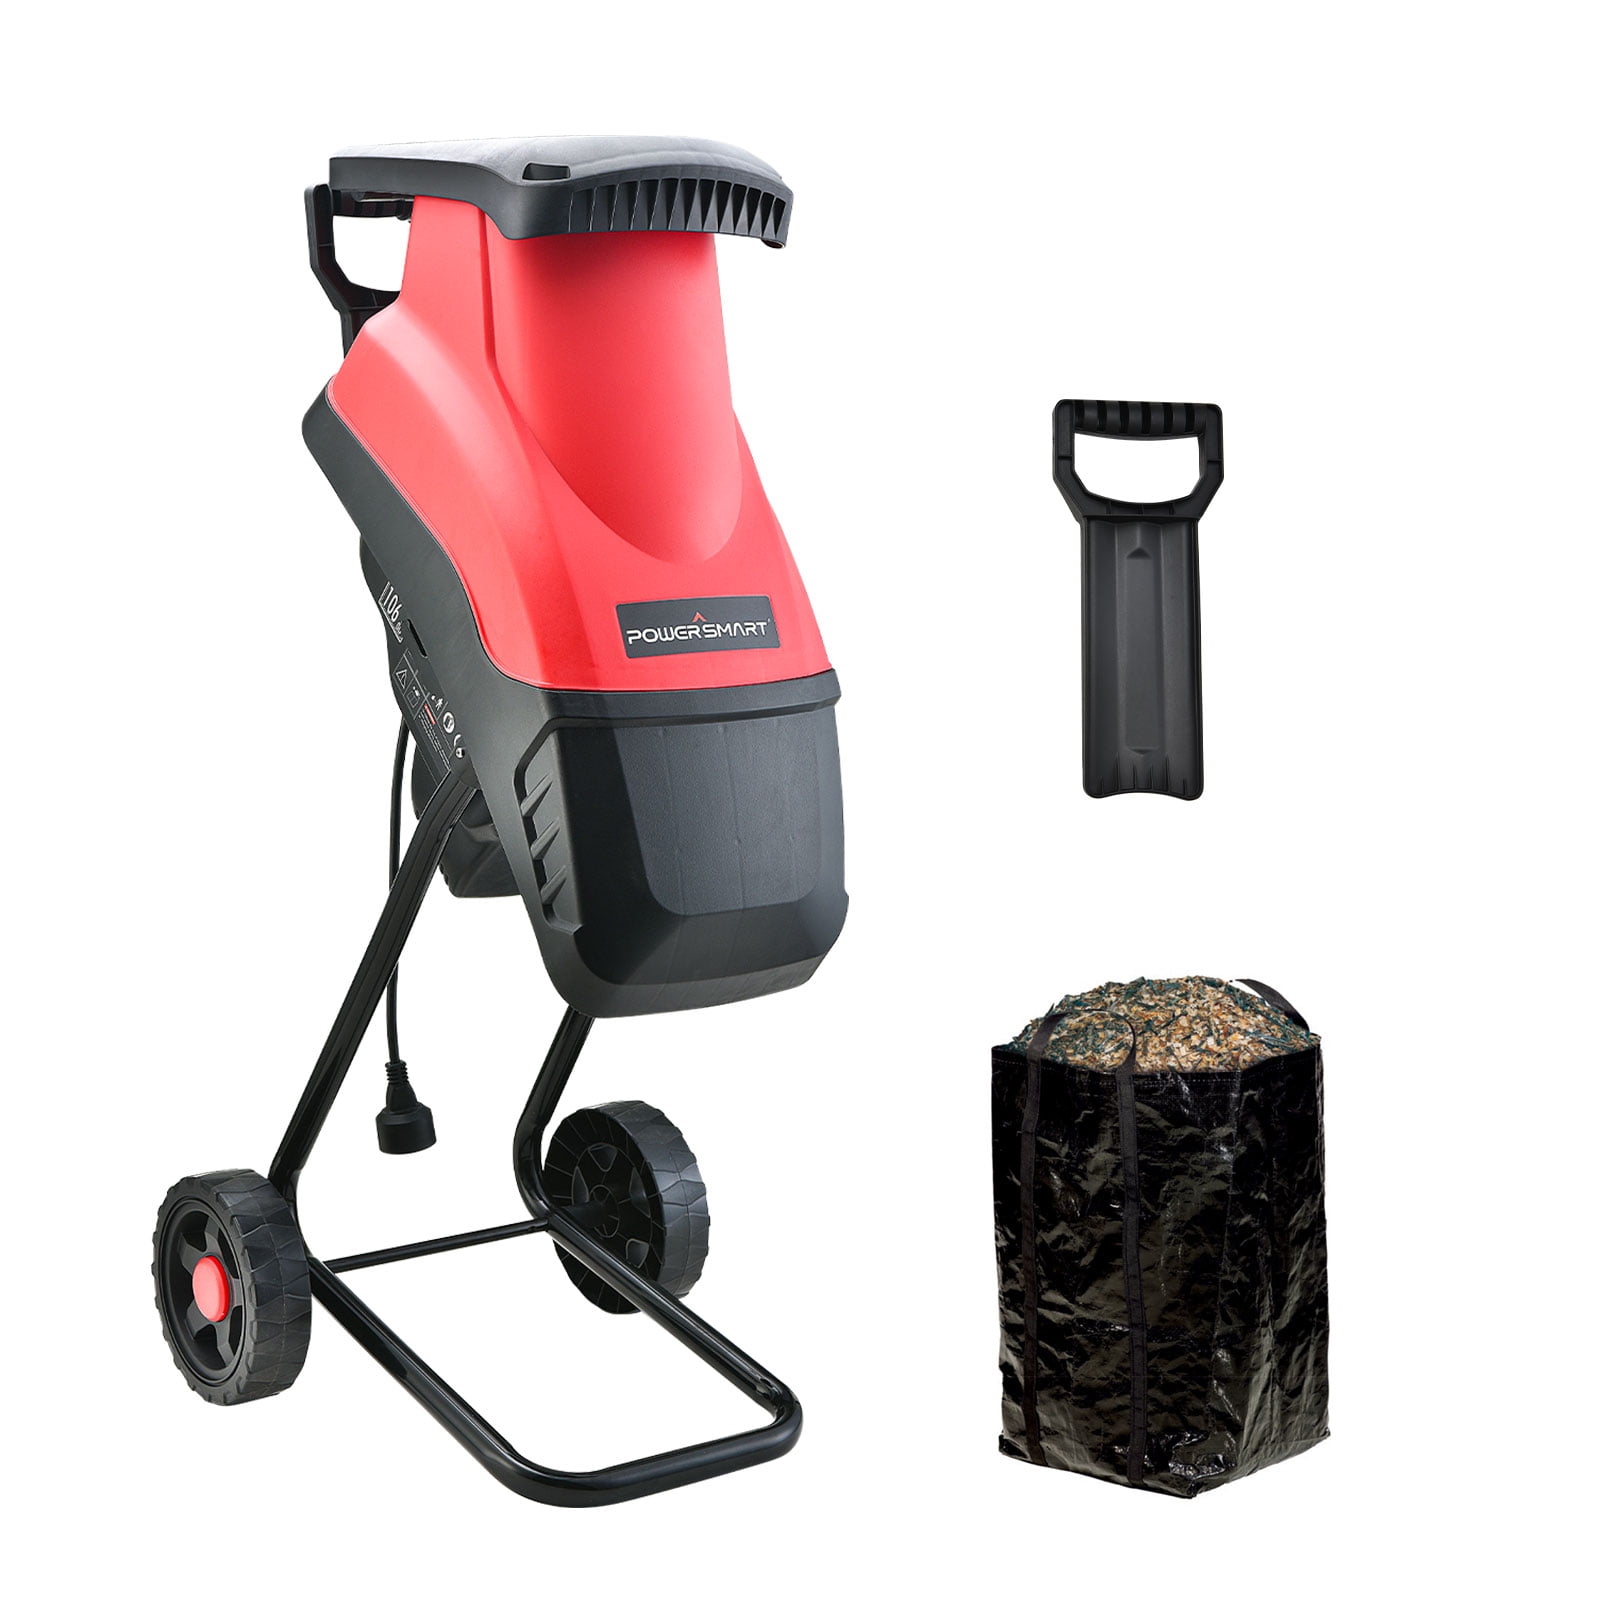 PowerSmart PS10W 15-AMP Wood Chipper Electric, Shredder, and